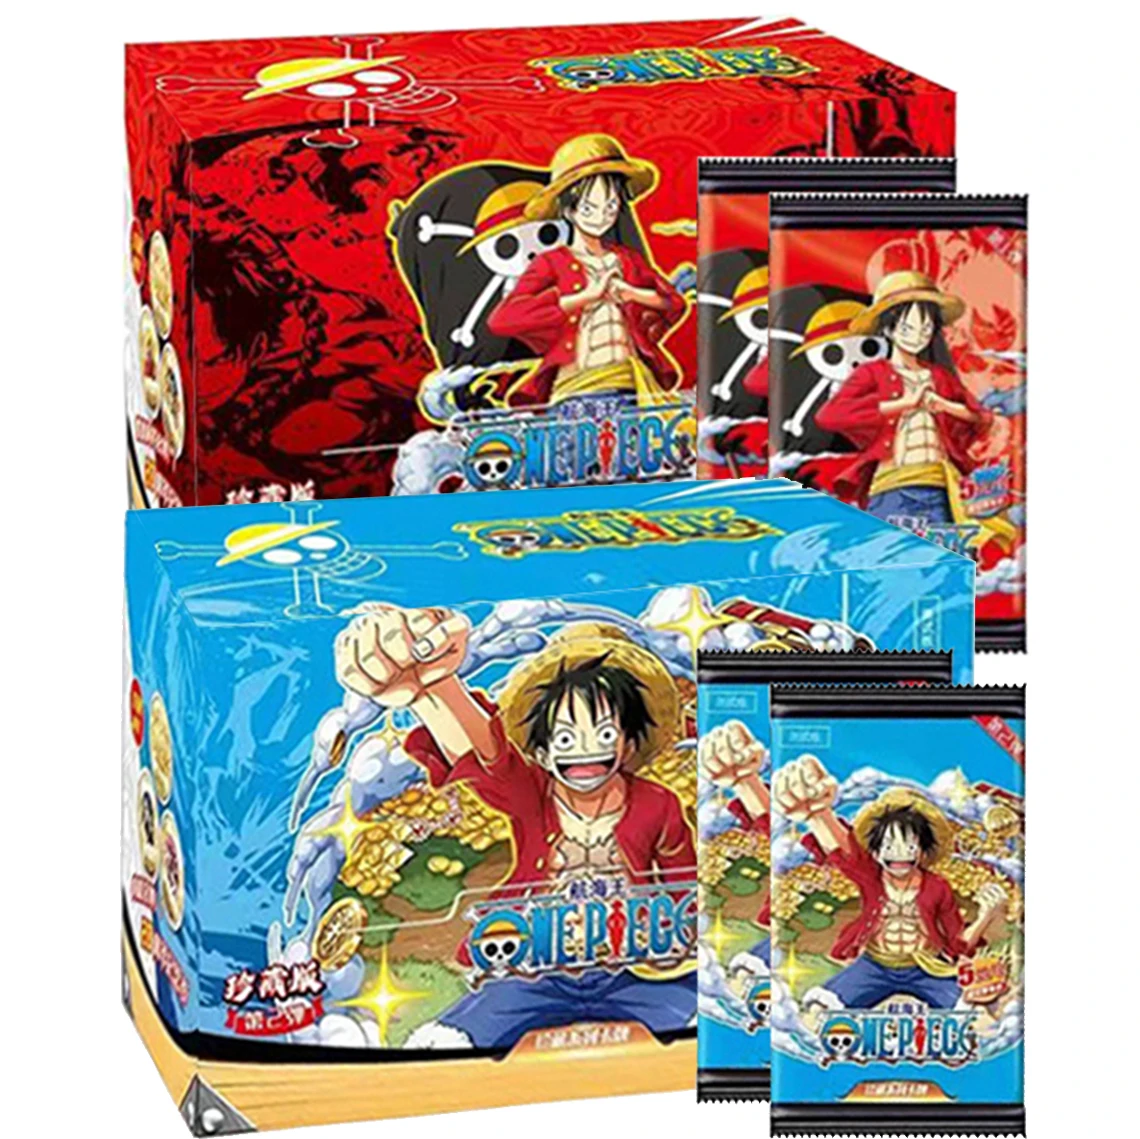 

Original ONE PIECE Collection Cards Anime Figures Playing Games Hobby Zoro Luffy Nami SSR Paper Rare Card for Child Gifts Toys